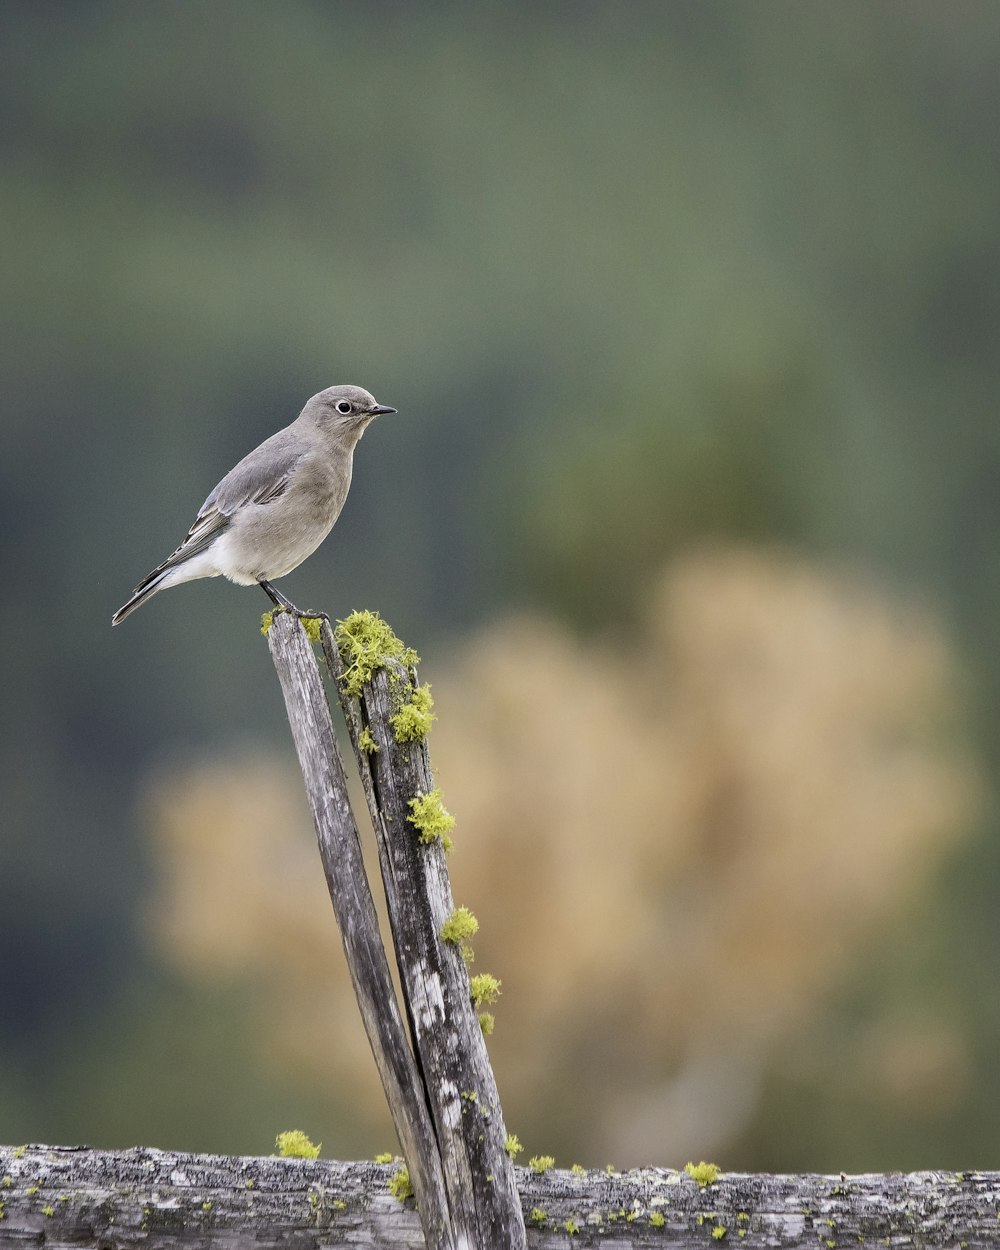 gray bird perched on brown wooden fence during daytime